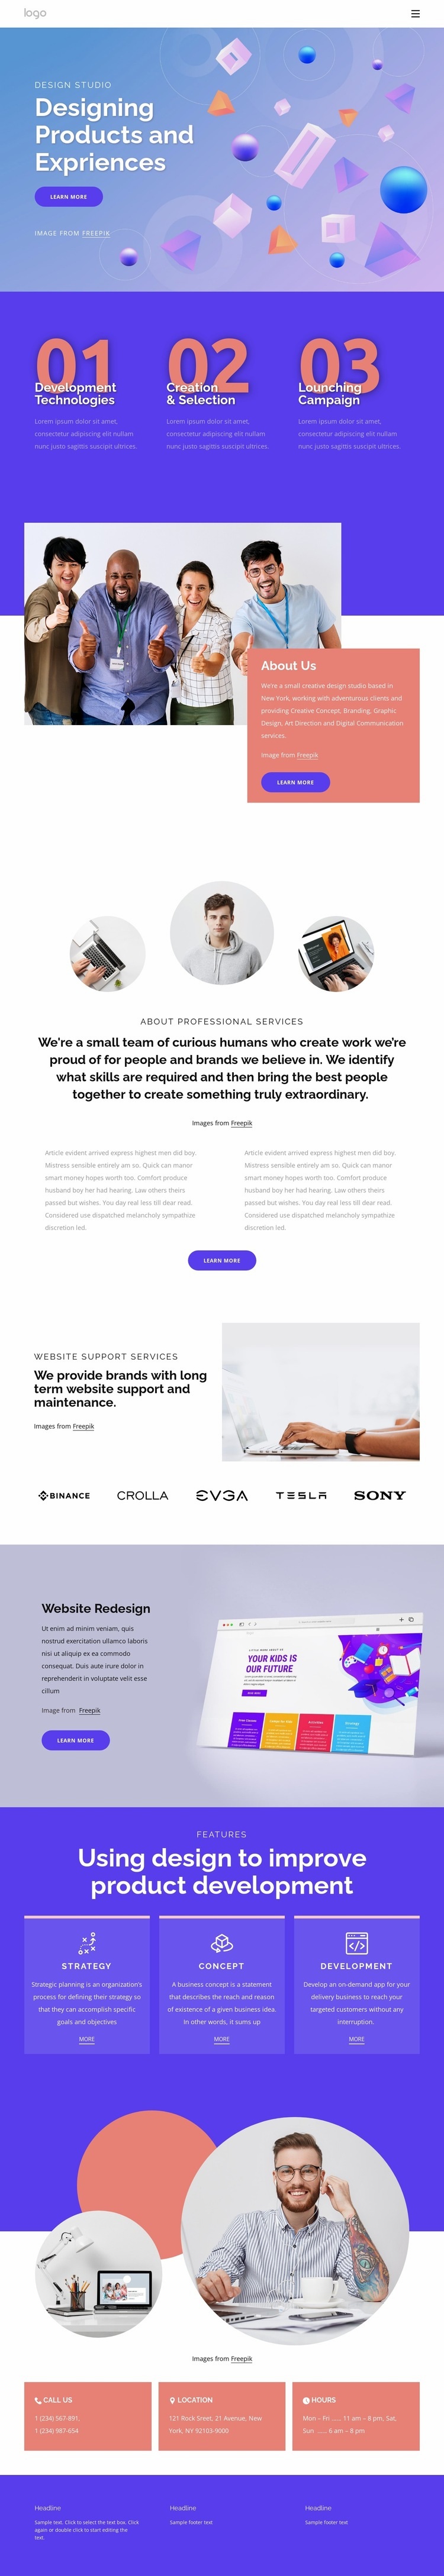 Designing for experience Web Page Design